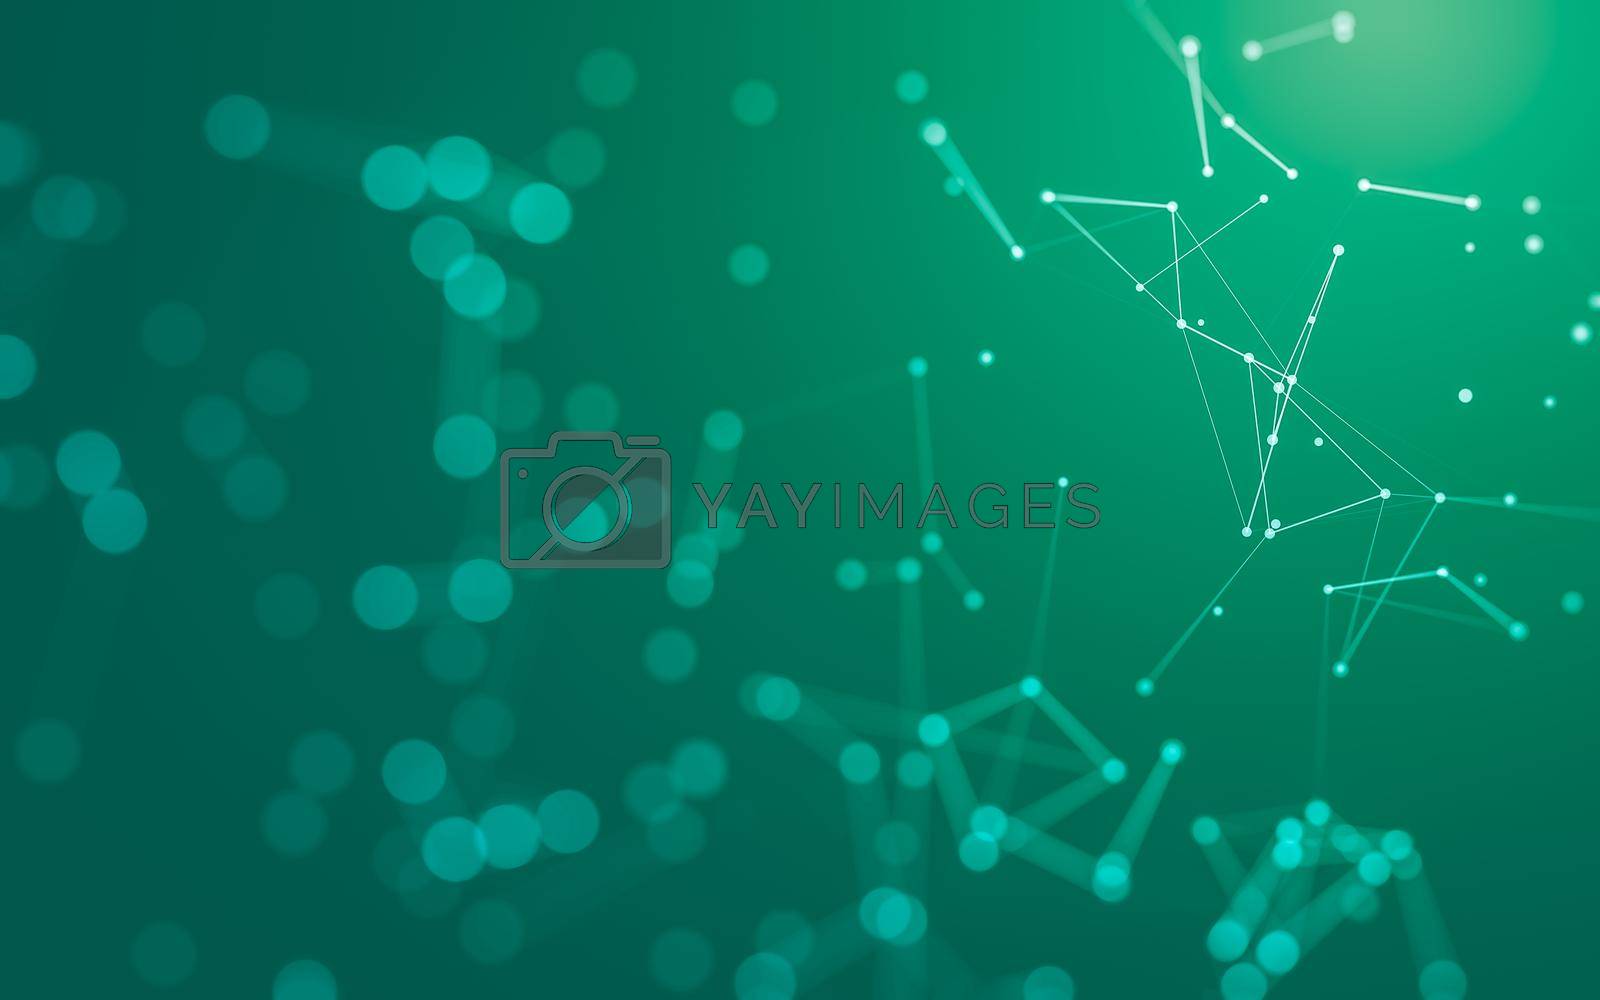 Royalty free image of Abstract background. Molecules technology with polygonal shapes, connecting dots and lines. Connection structure. Big data visualization.  by teerawit